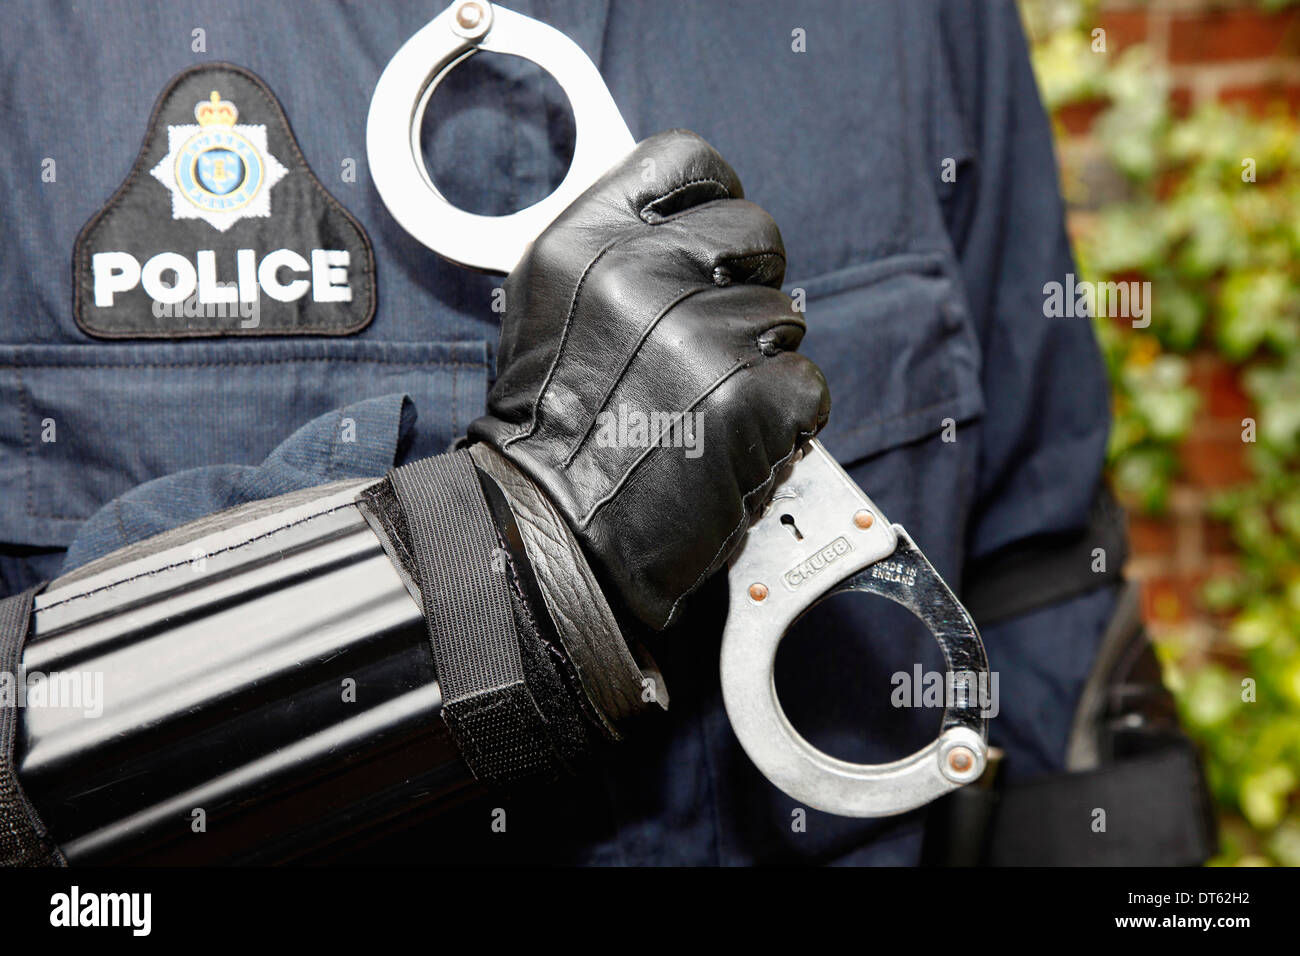 England, Society, Law and Order, Detail of Police law enforcement officer wearing body armour and holding handcuffs. Stock Photo